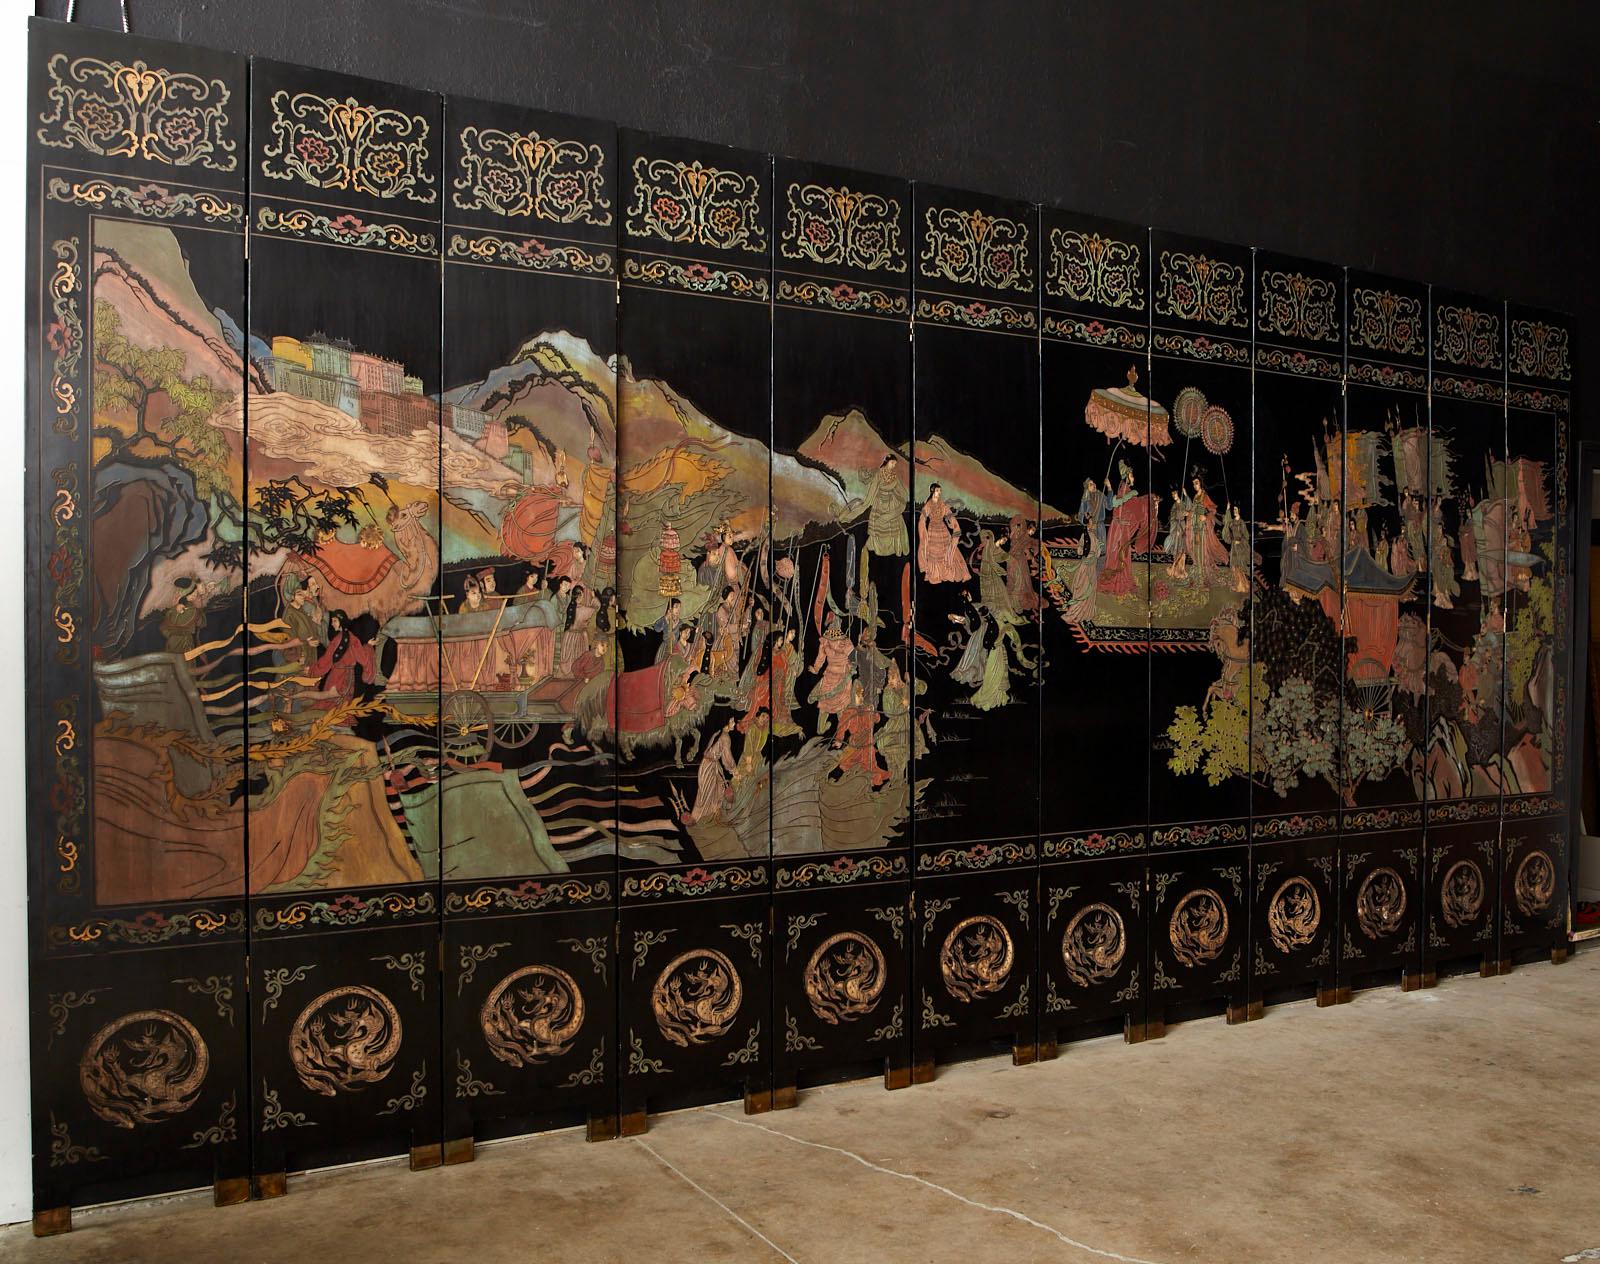 Monumental Chinese export twelve-panel lacquered Coromandel screen of Chinese mythological Daoist character Xiwangmu (Queen mother of the west). Remarkable screen full of vibrant color incised lacquer panels. The scene depicts an entourage of